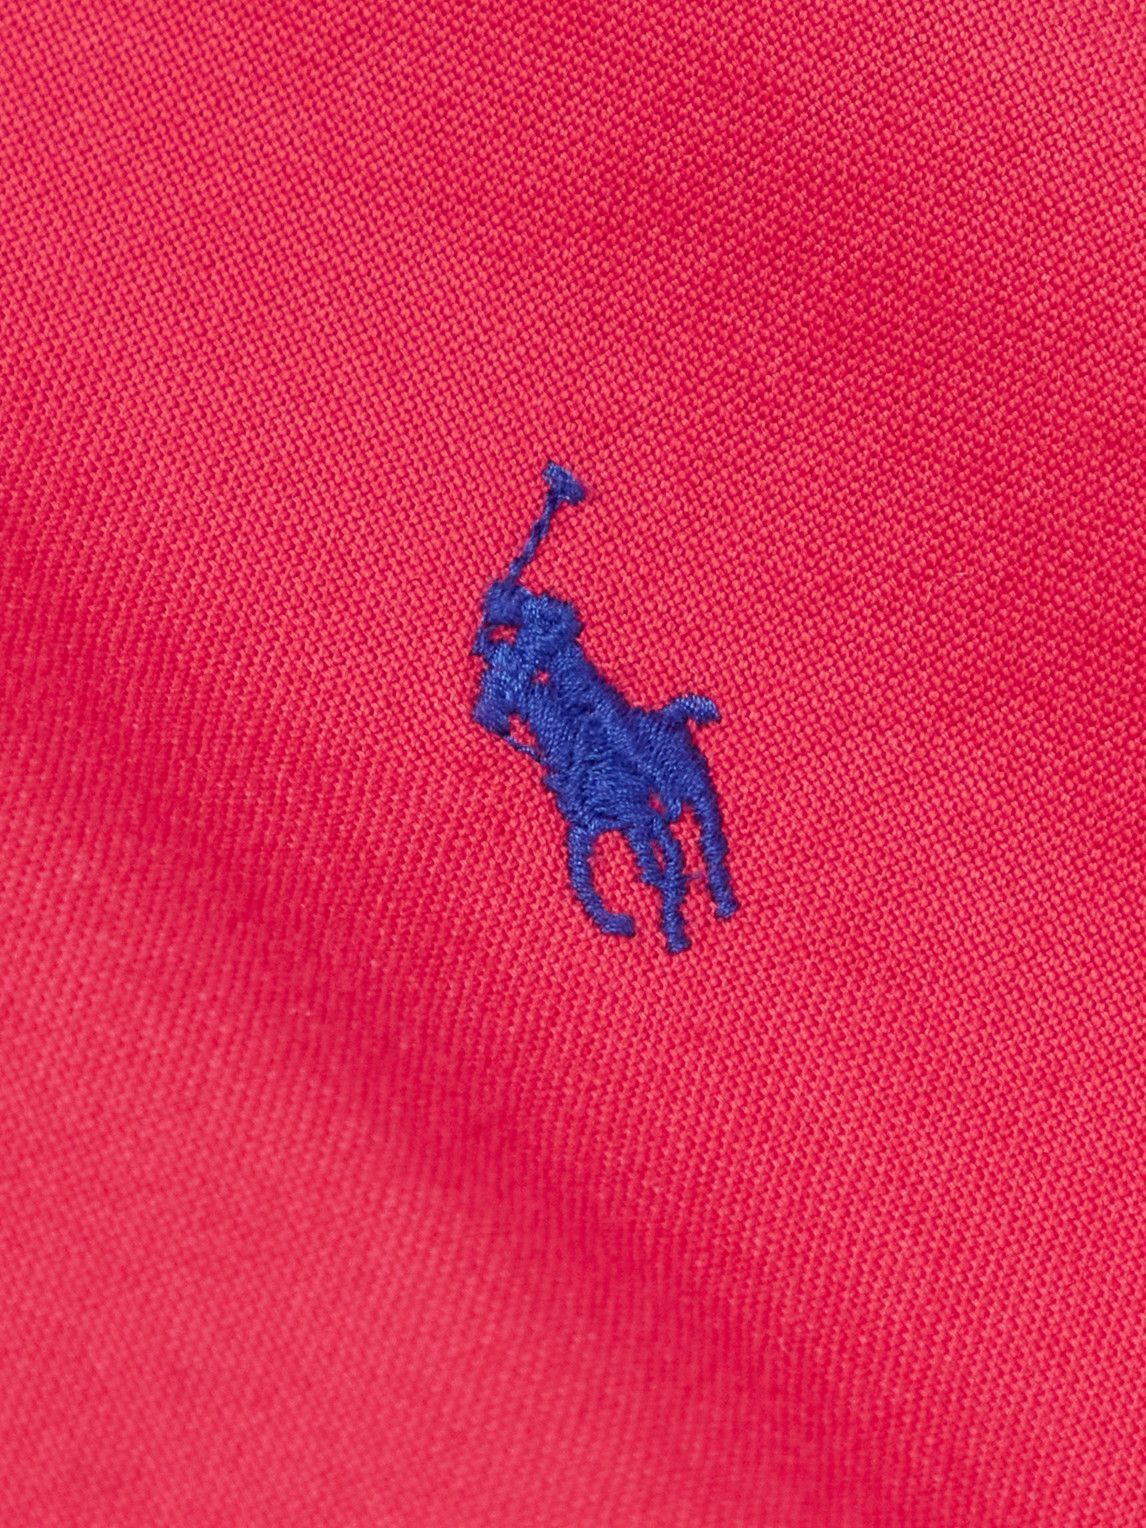 Polo Ralph Lauren - Slim-Fit Button-Down Collar Logo-Embroidered Cotton Oxford Shirt - Red